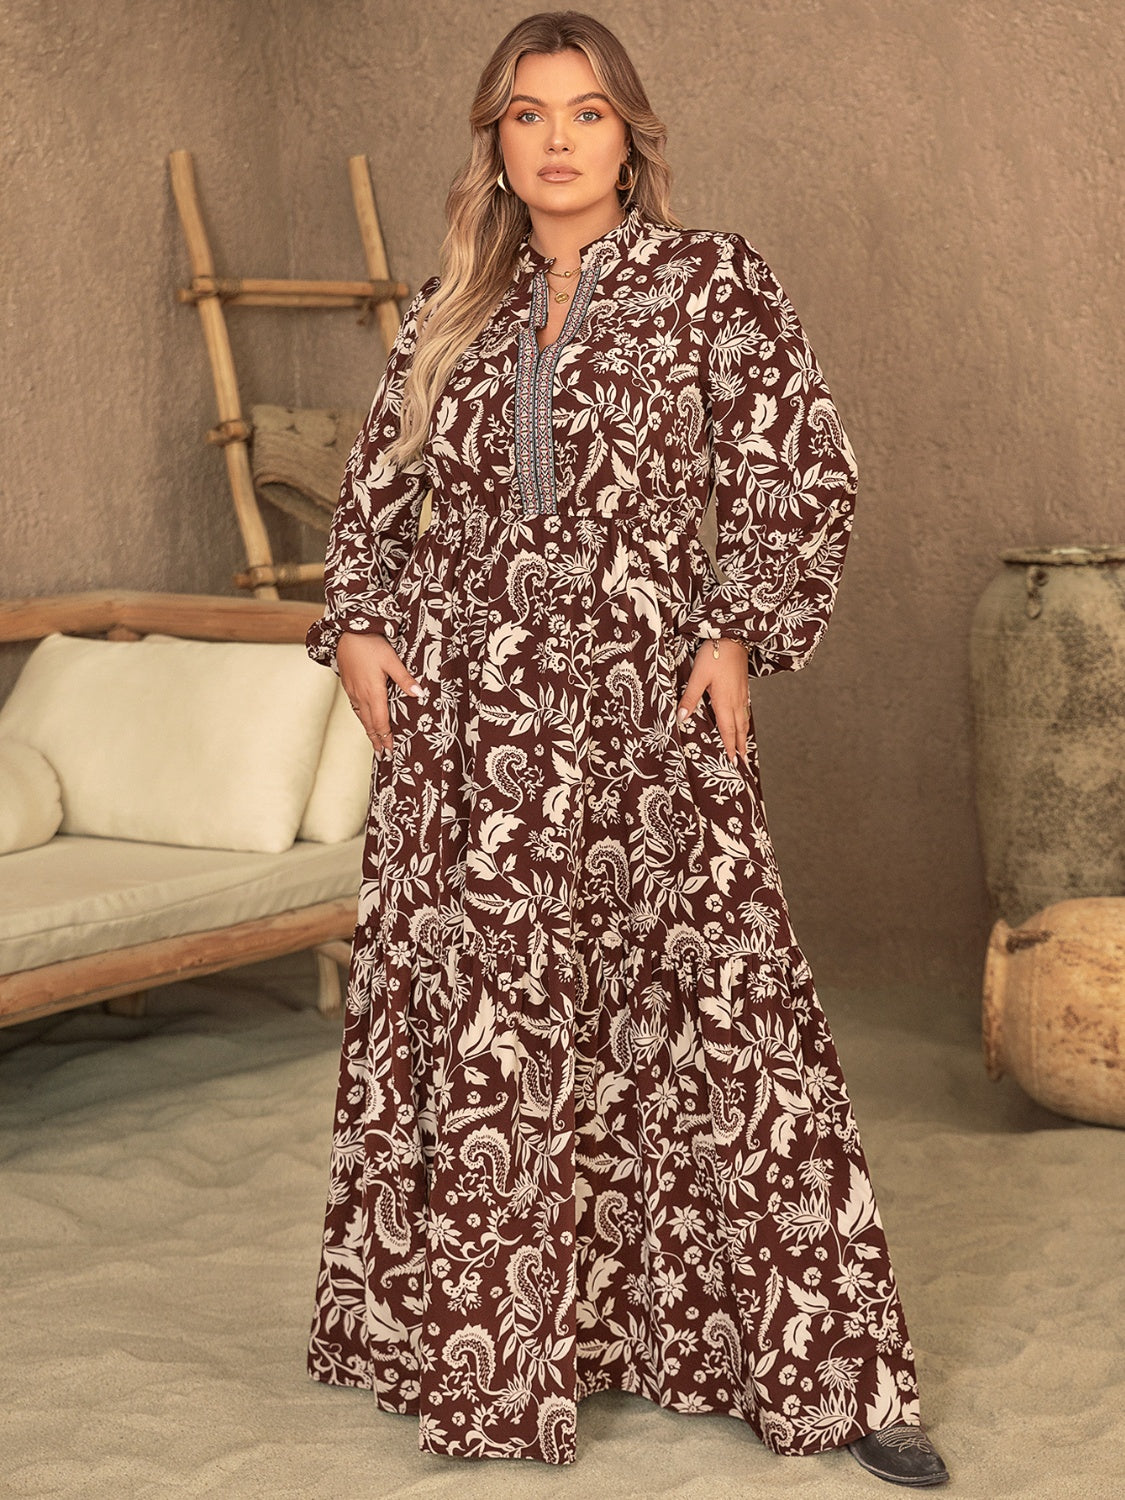 Elegant Plus Size Maxi Dress for Women Over 50 - Notched Balloon Sleeve, Printed Design, Perfect for Summer Beach Wedding Guest Parties